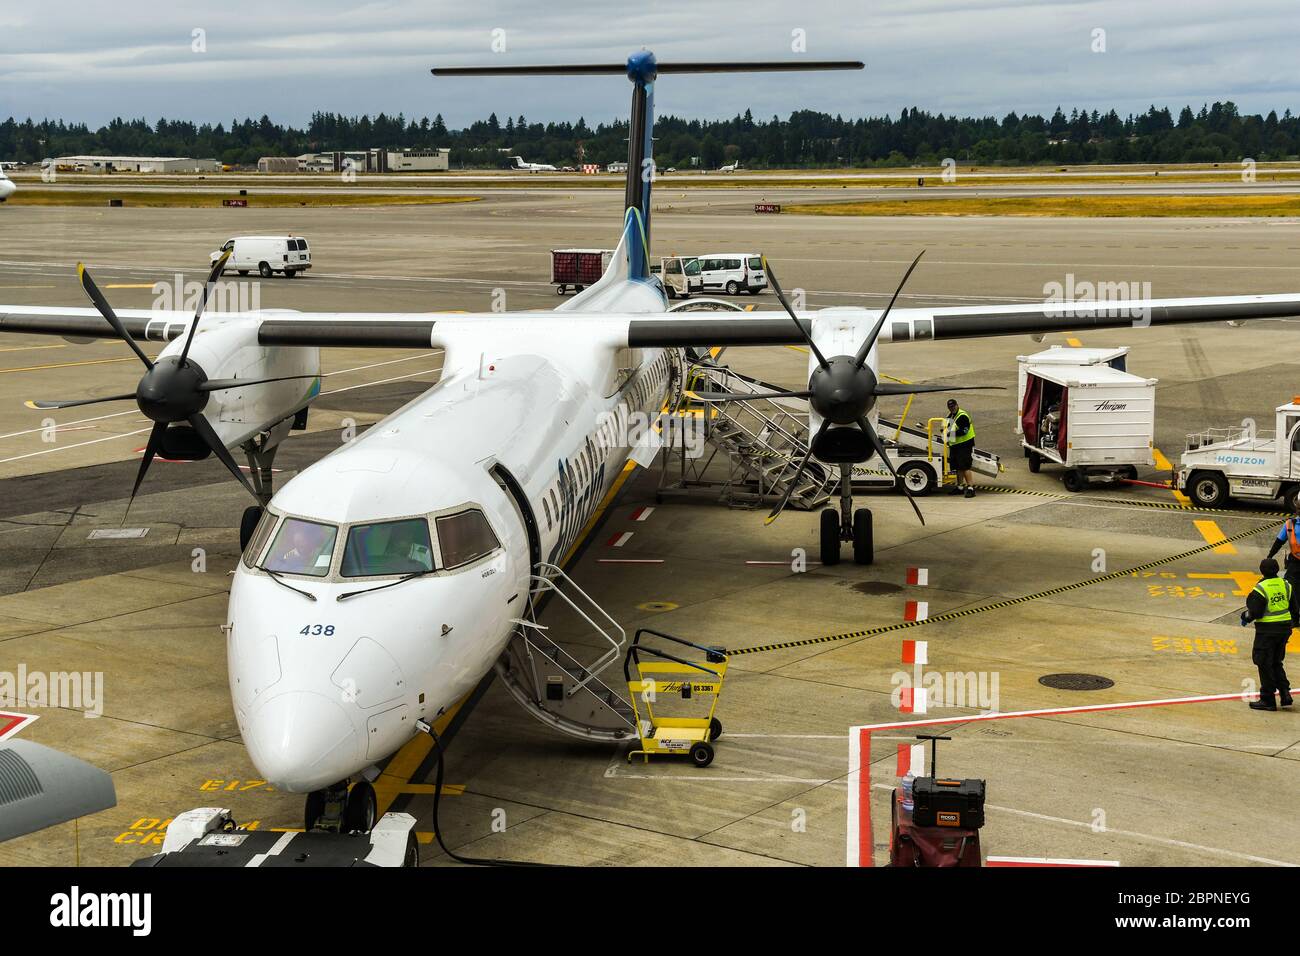 SEATTLE TACOMA AIRPORT, WA, USA - JUNE 2018: Alaska Airlines De Havilland DHC8 400 turboprop plane awaiting passengers to board at Seattle airport Stock Photo